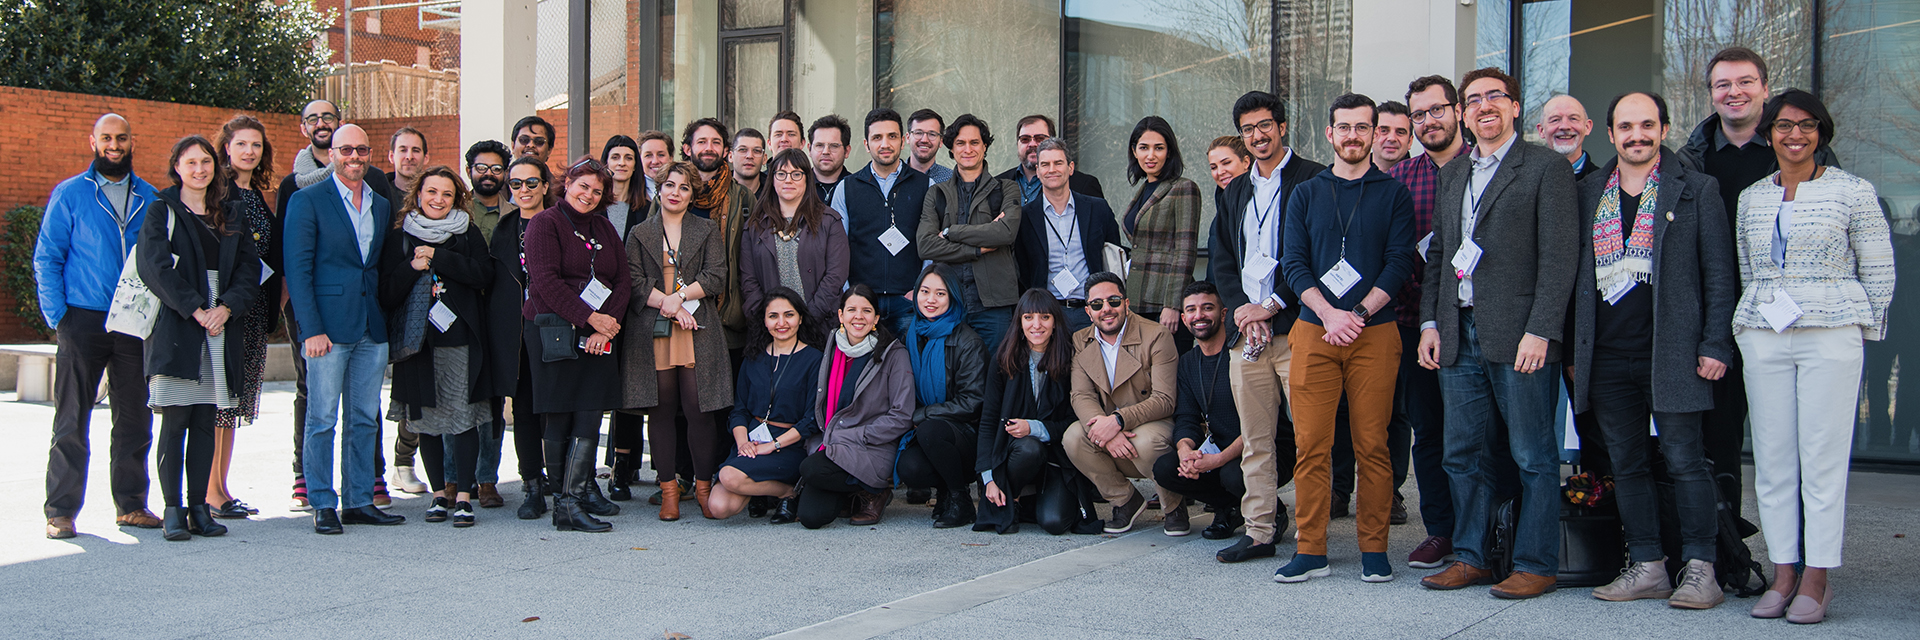 Concave's Divergence In Architectural Research PhD Symposium participants.